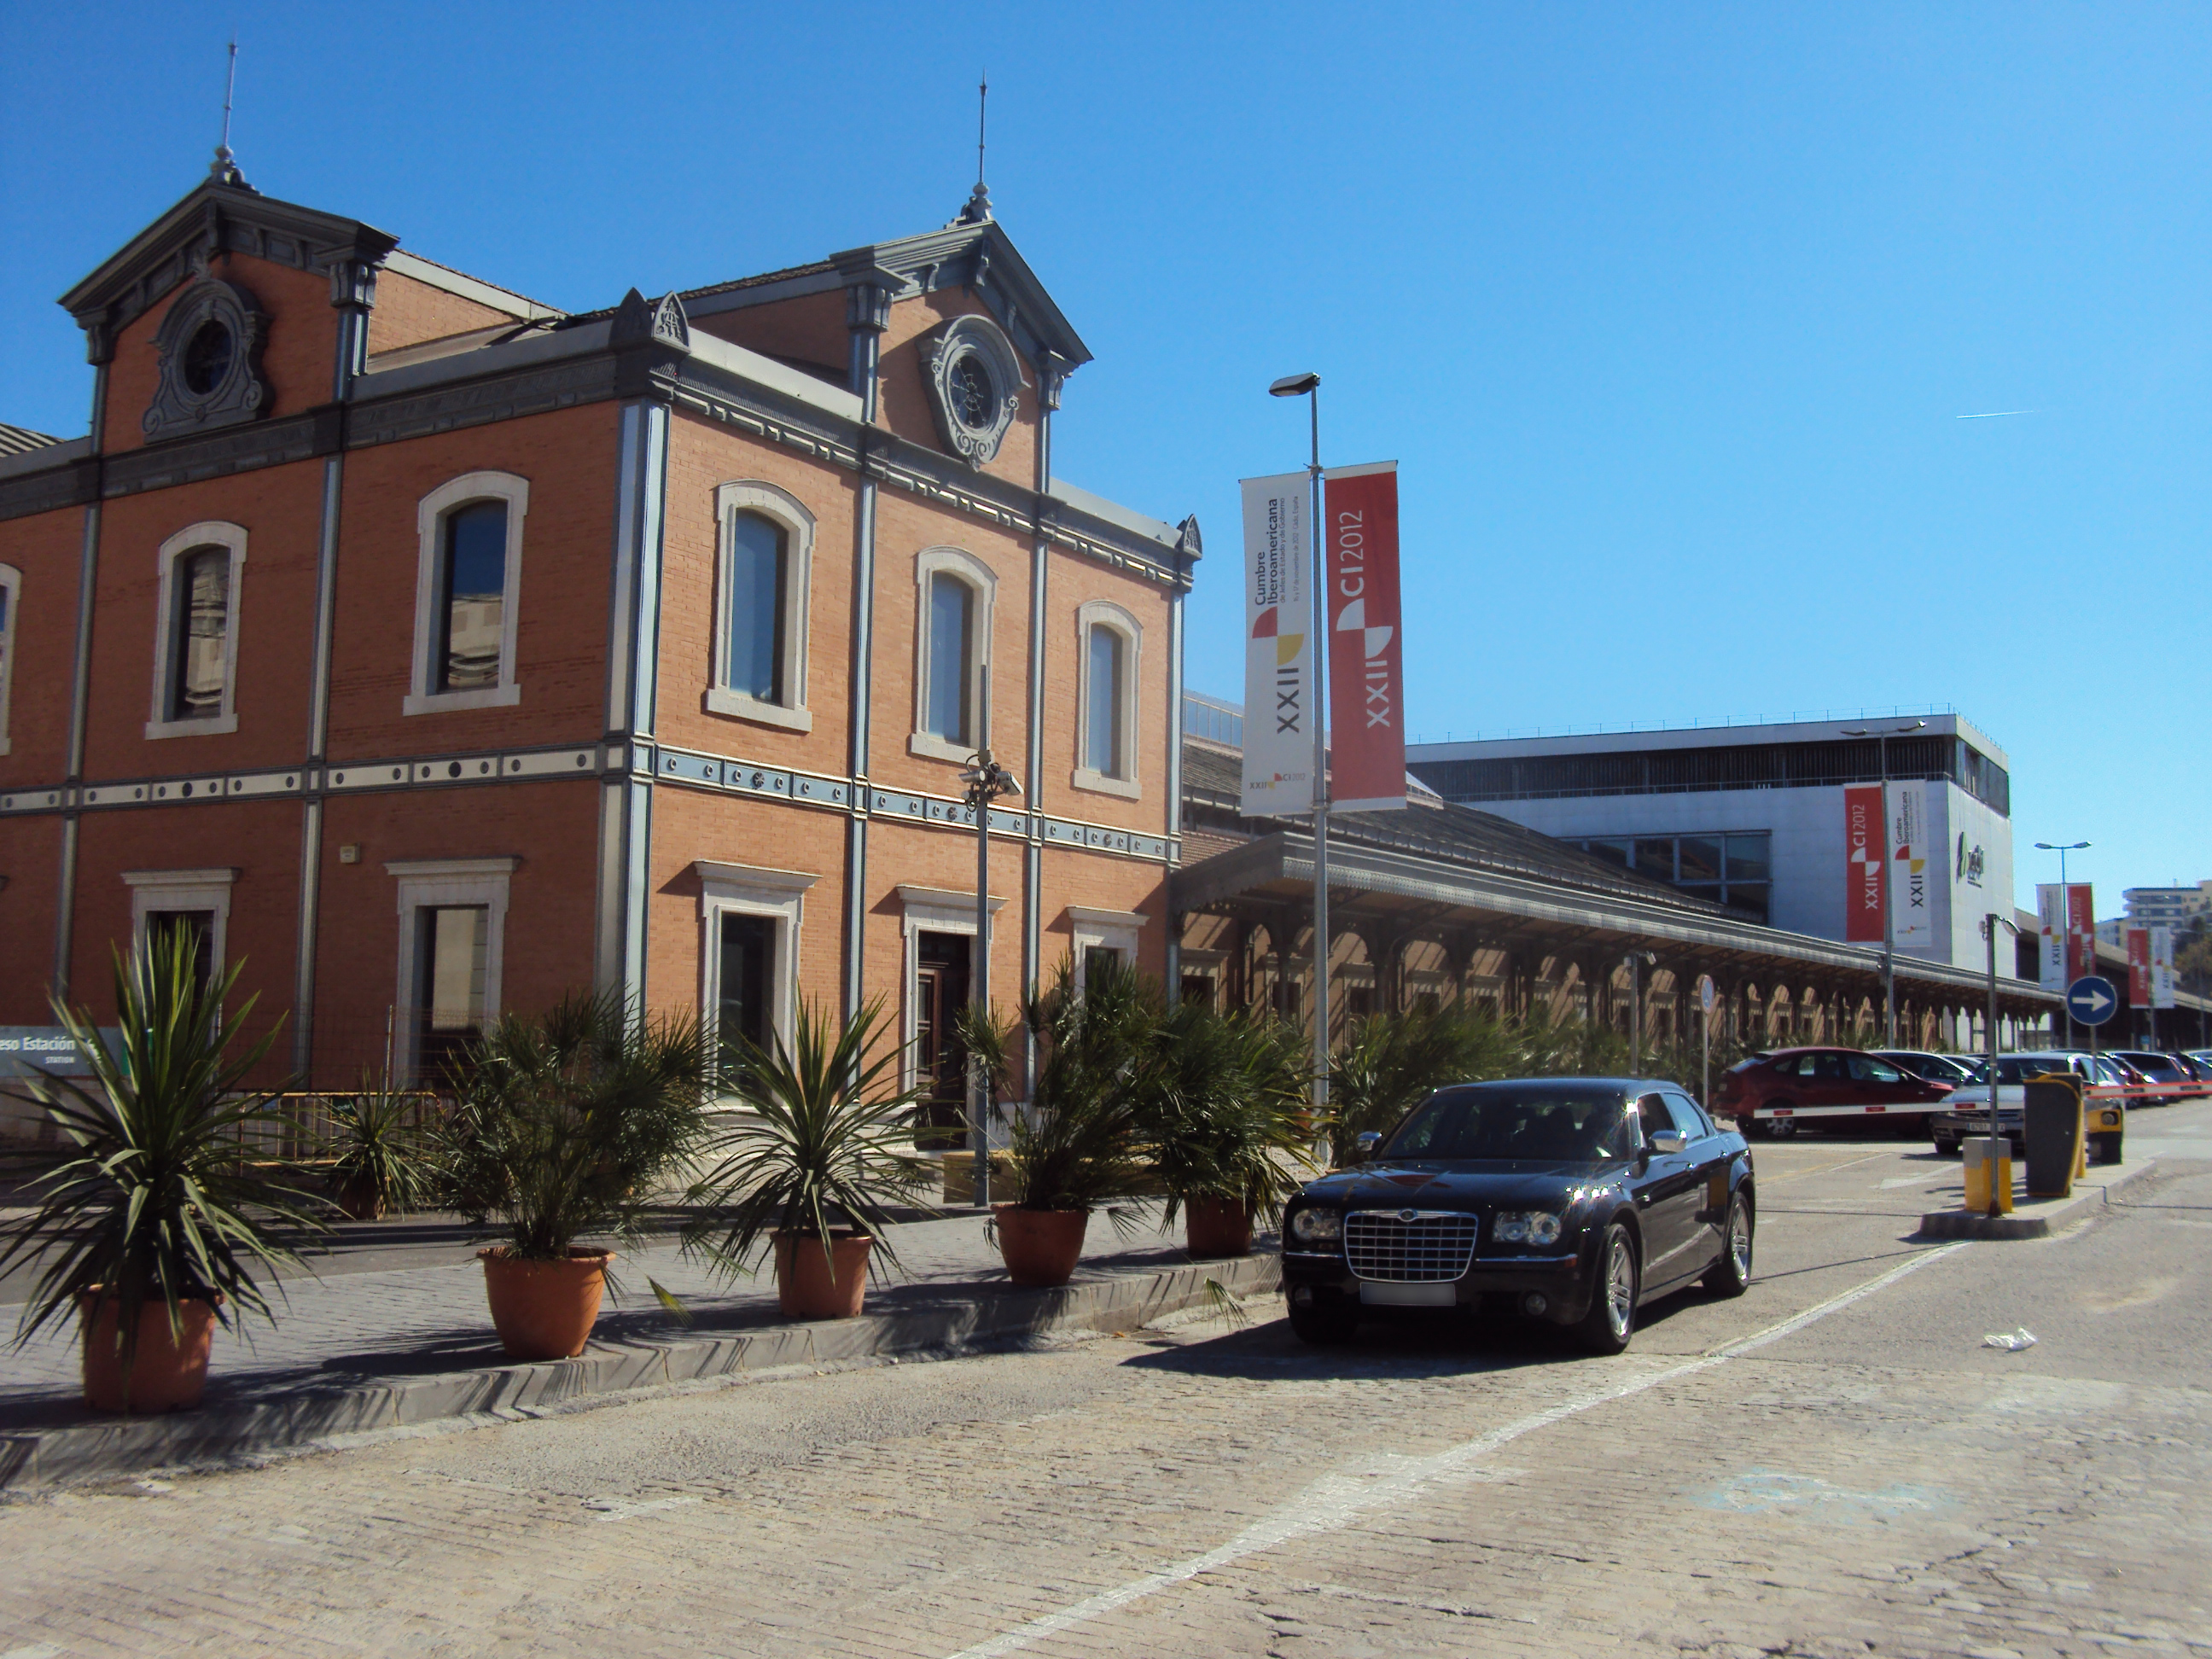 FCC refurbishes former railway station in Cádiz for the XXII Ibero-American Summit of Heads of State and Governments